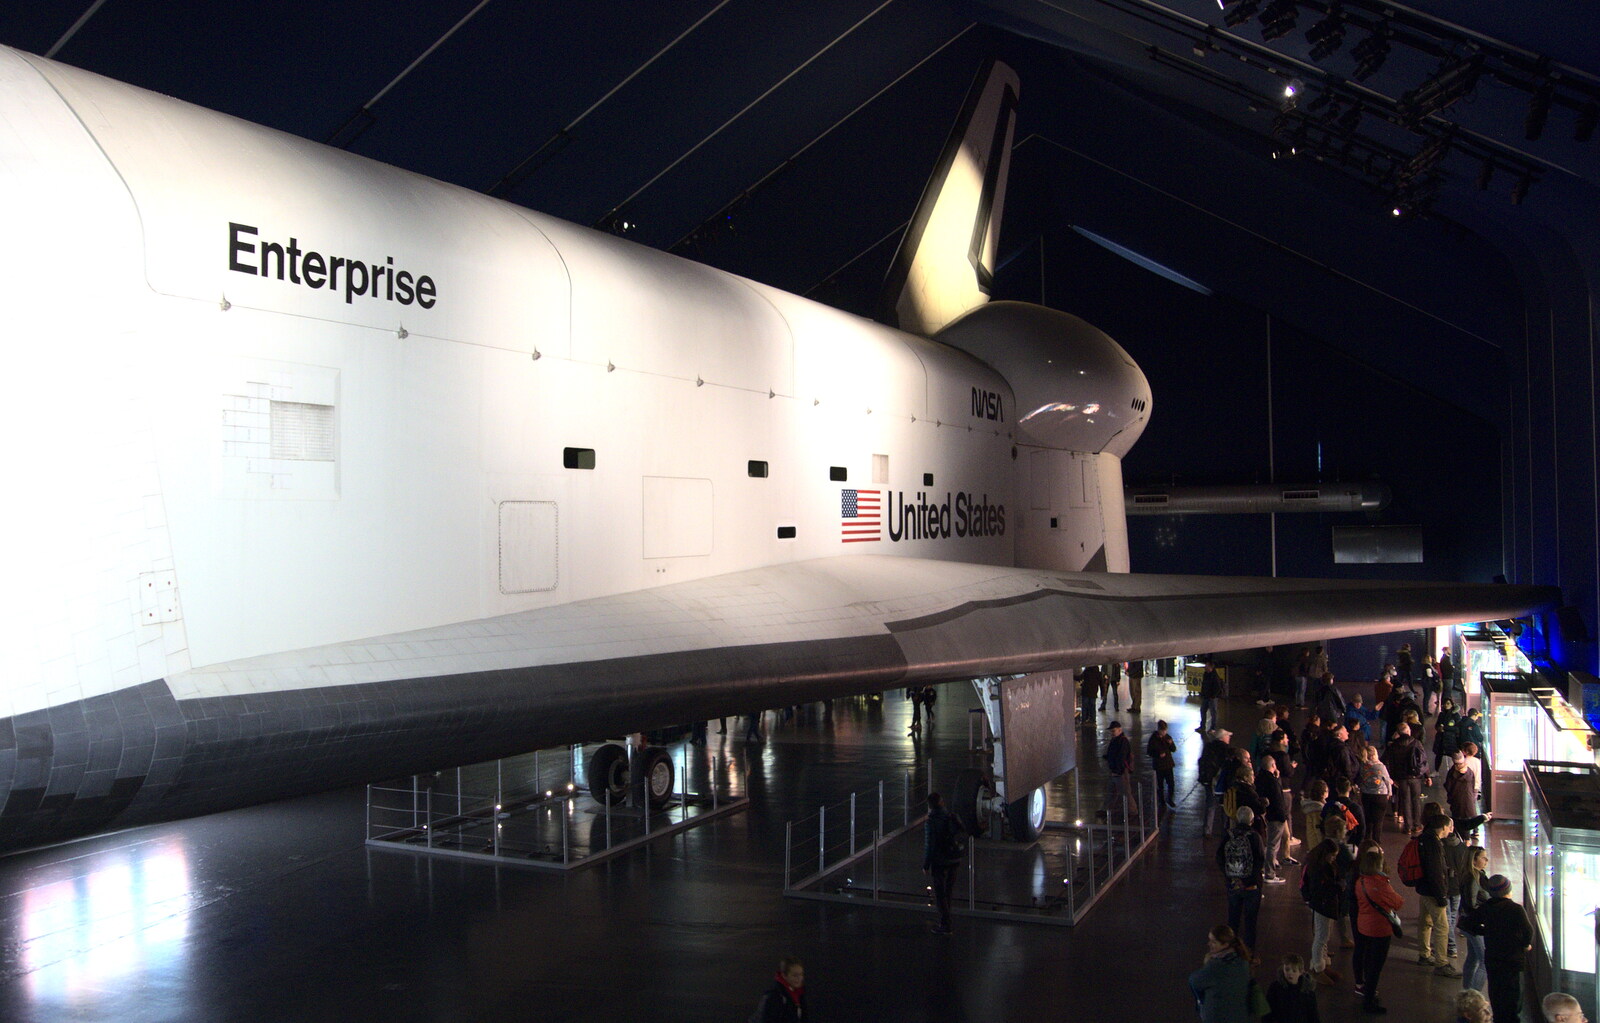 The prototype Enterprise, as flown from a 747 from Times Square, USS Intrepid and the High Line, Manhattan, New York - 25th October 2018